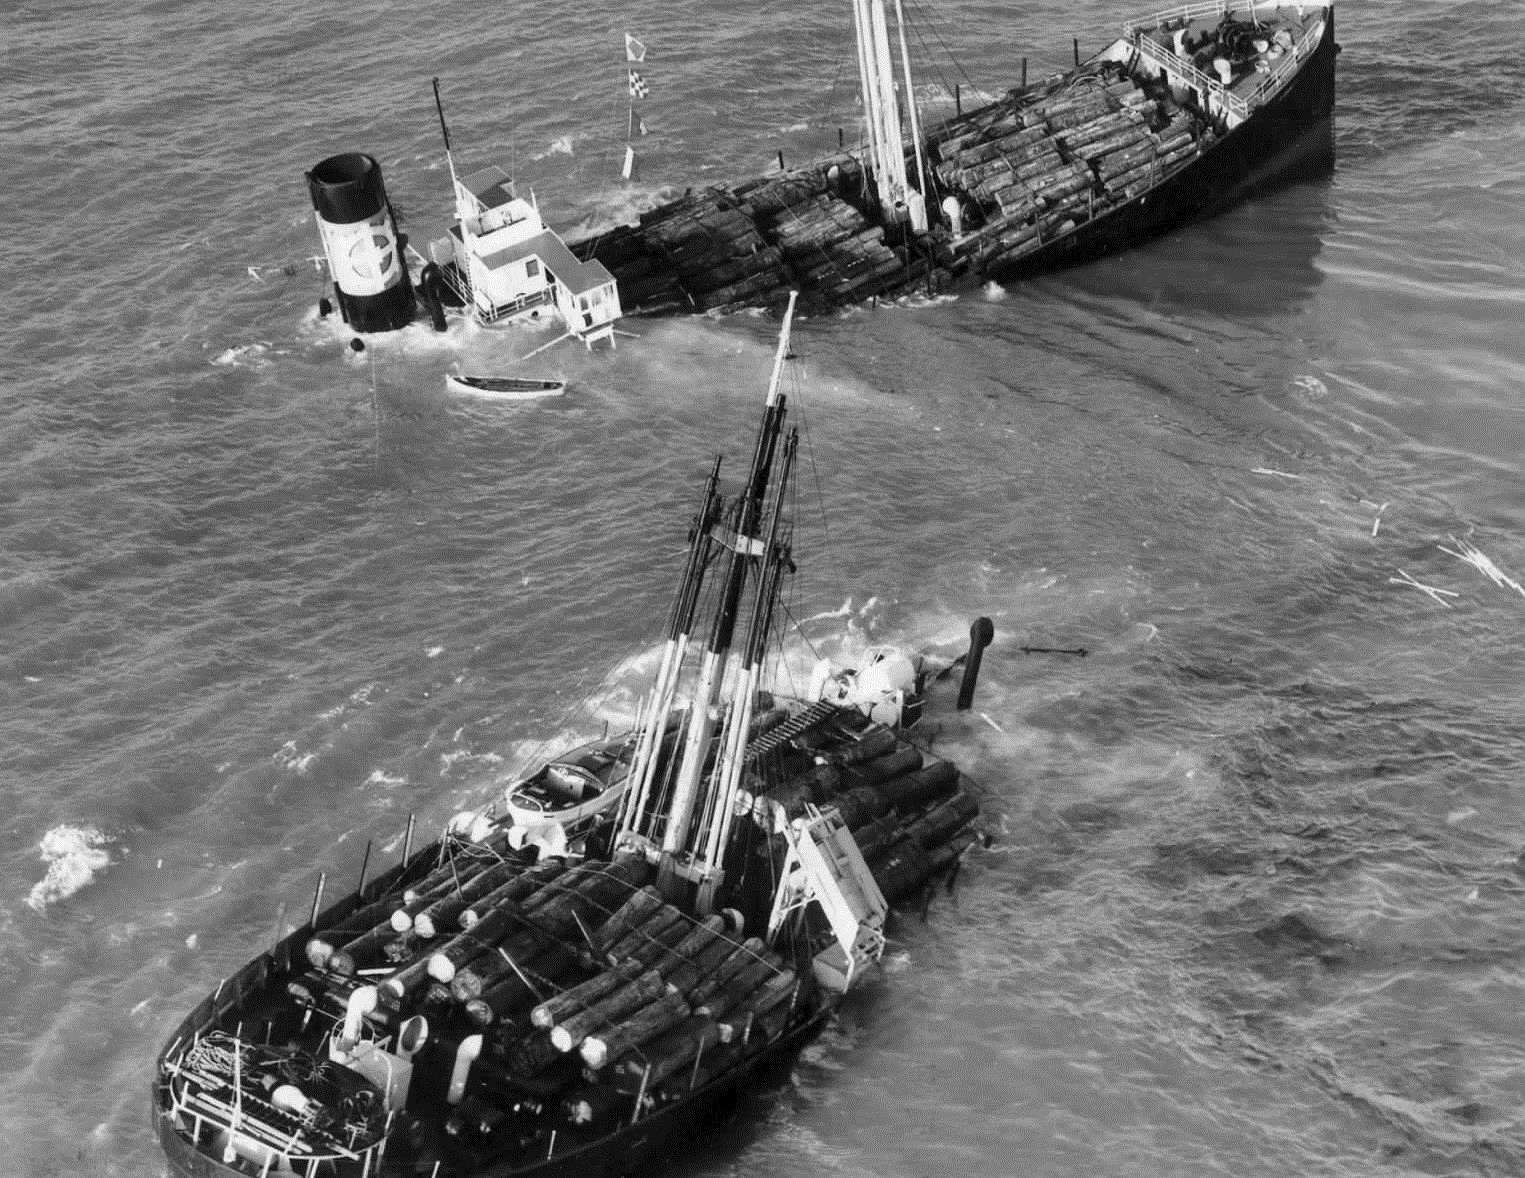 AGEN wrecked on the Goodwin Sands in 1952